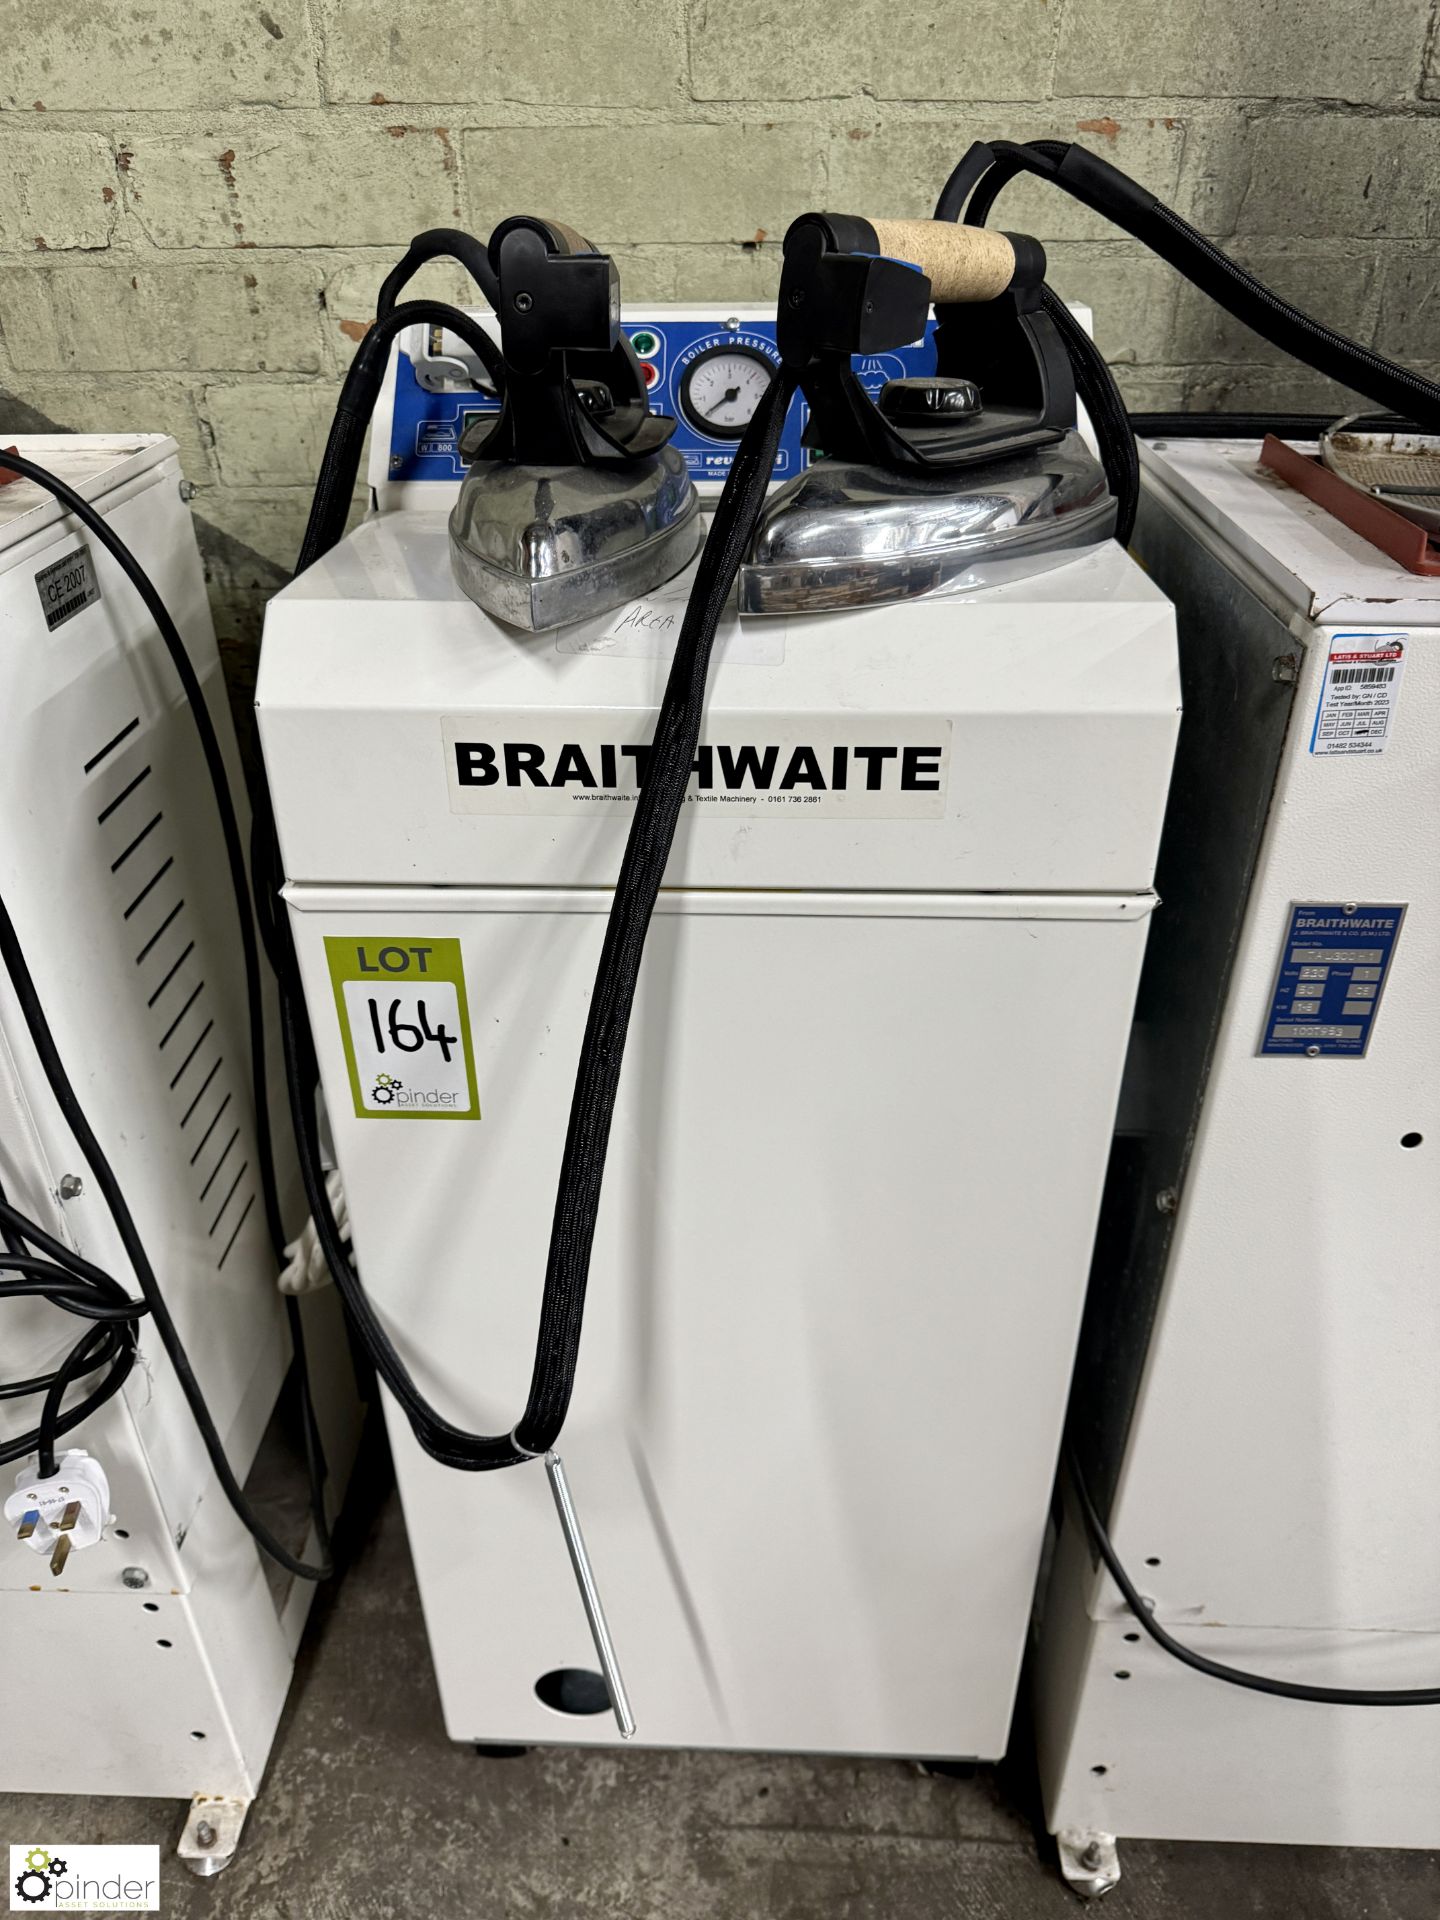 Braithwaite Reverbi Steam Ironing Boiler, with 2 irons and 2 heated ironing tables, 240volts, with - Image 3 of 9